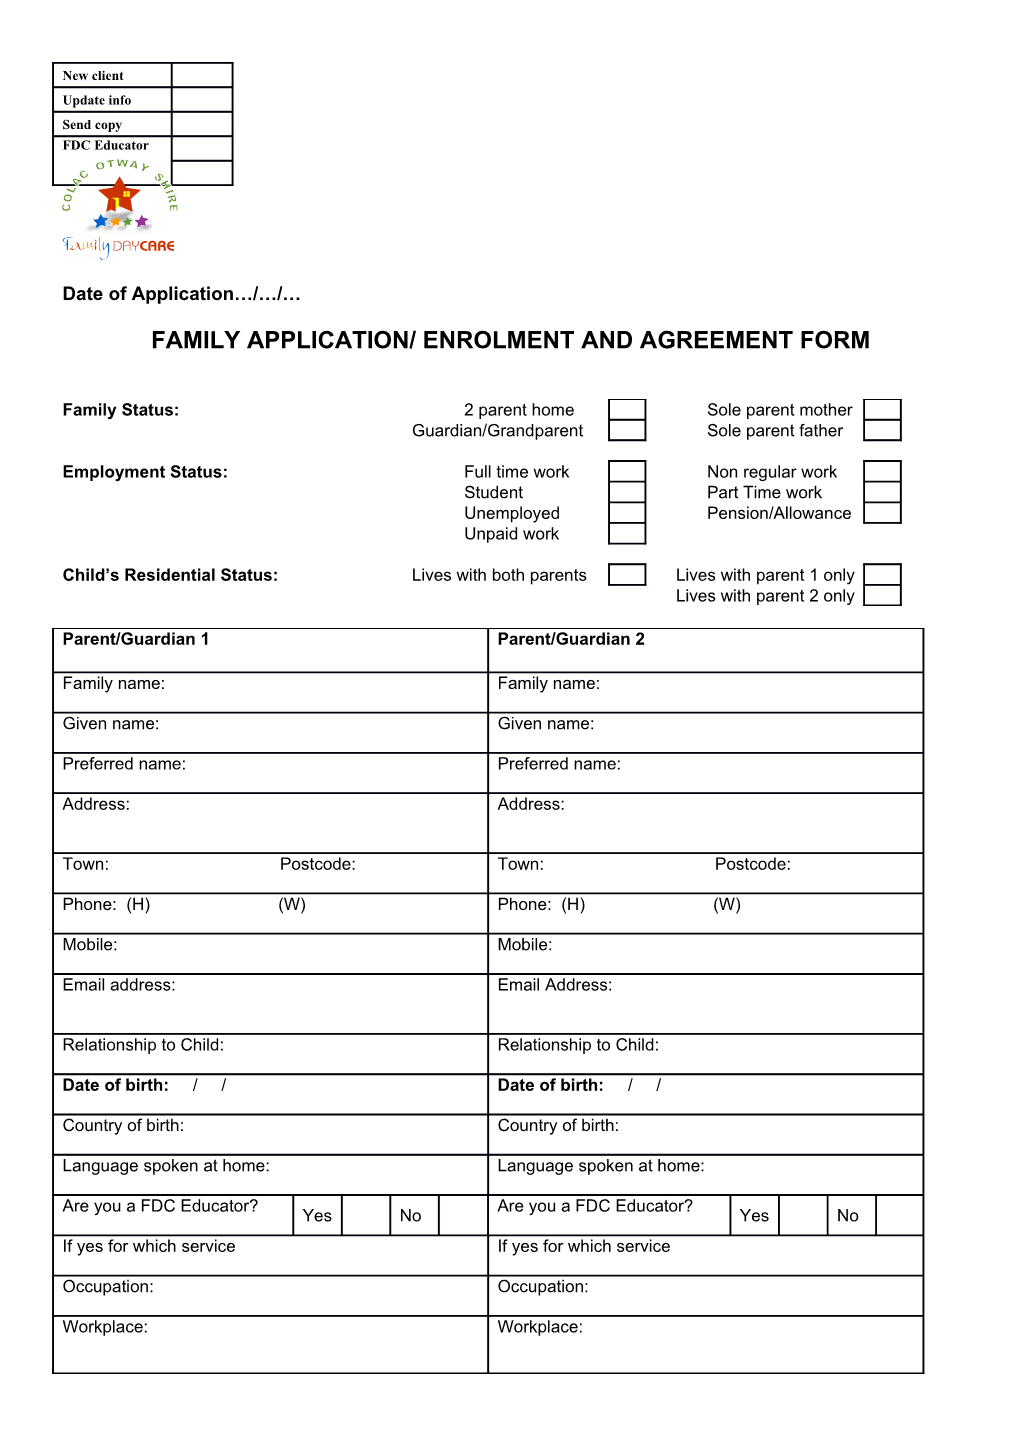 Family Application/ Enrolment and Agreement Form